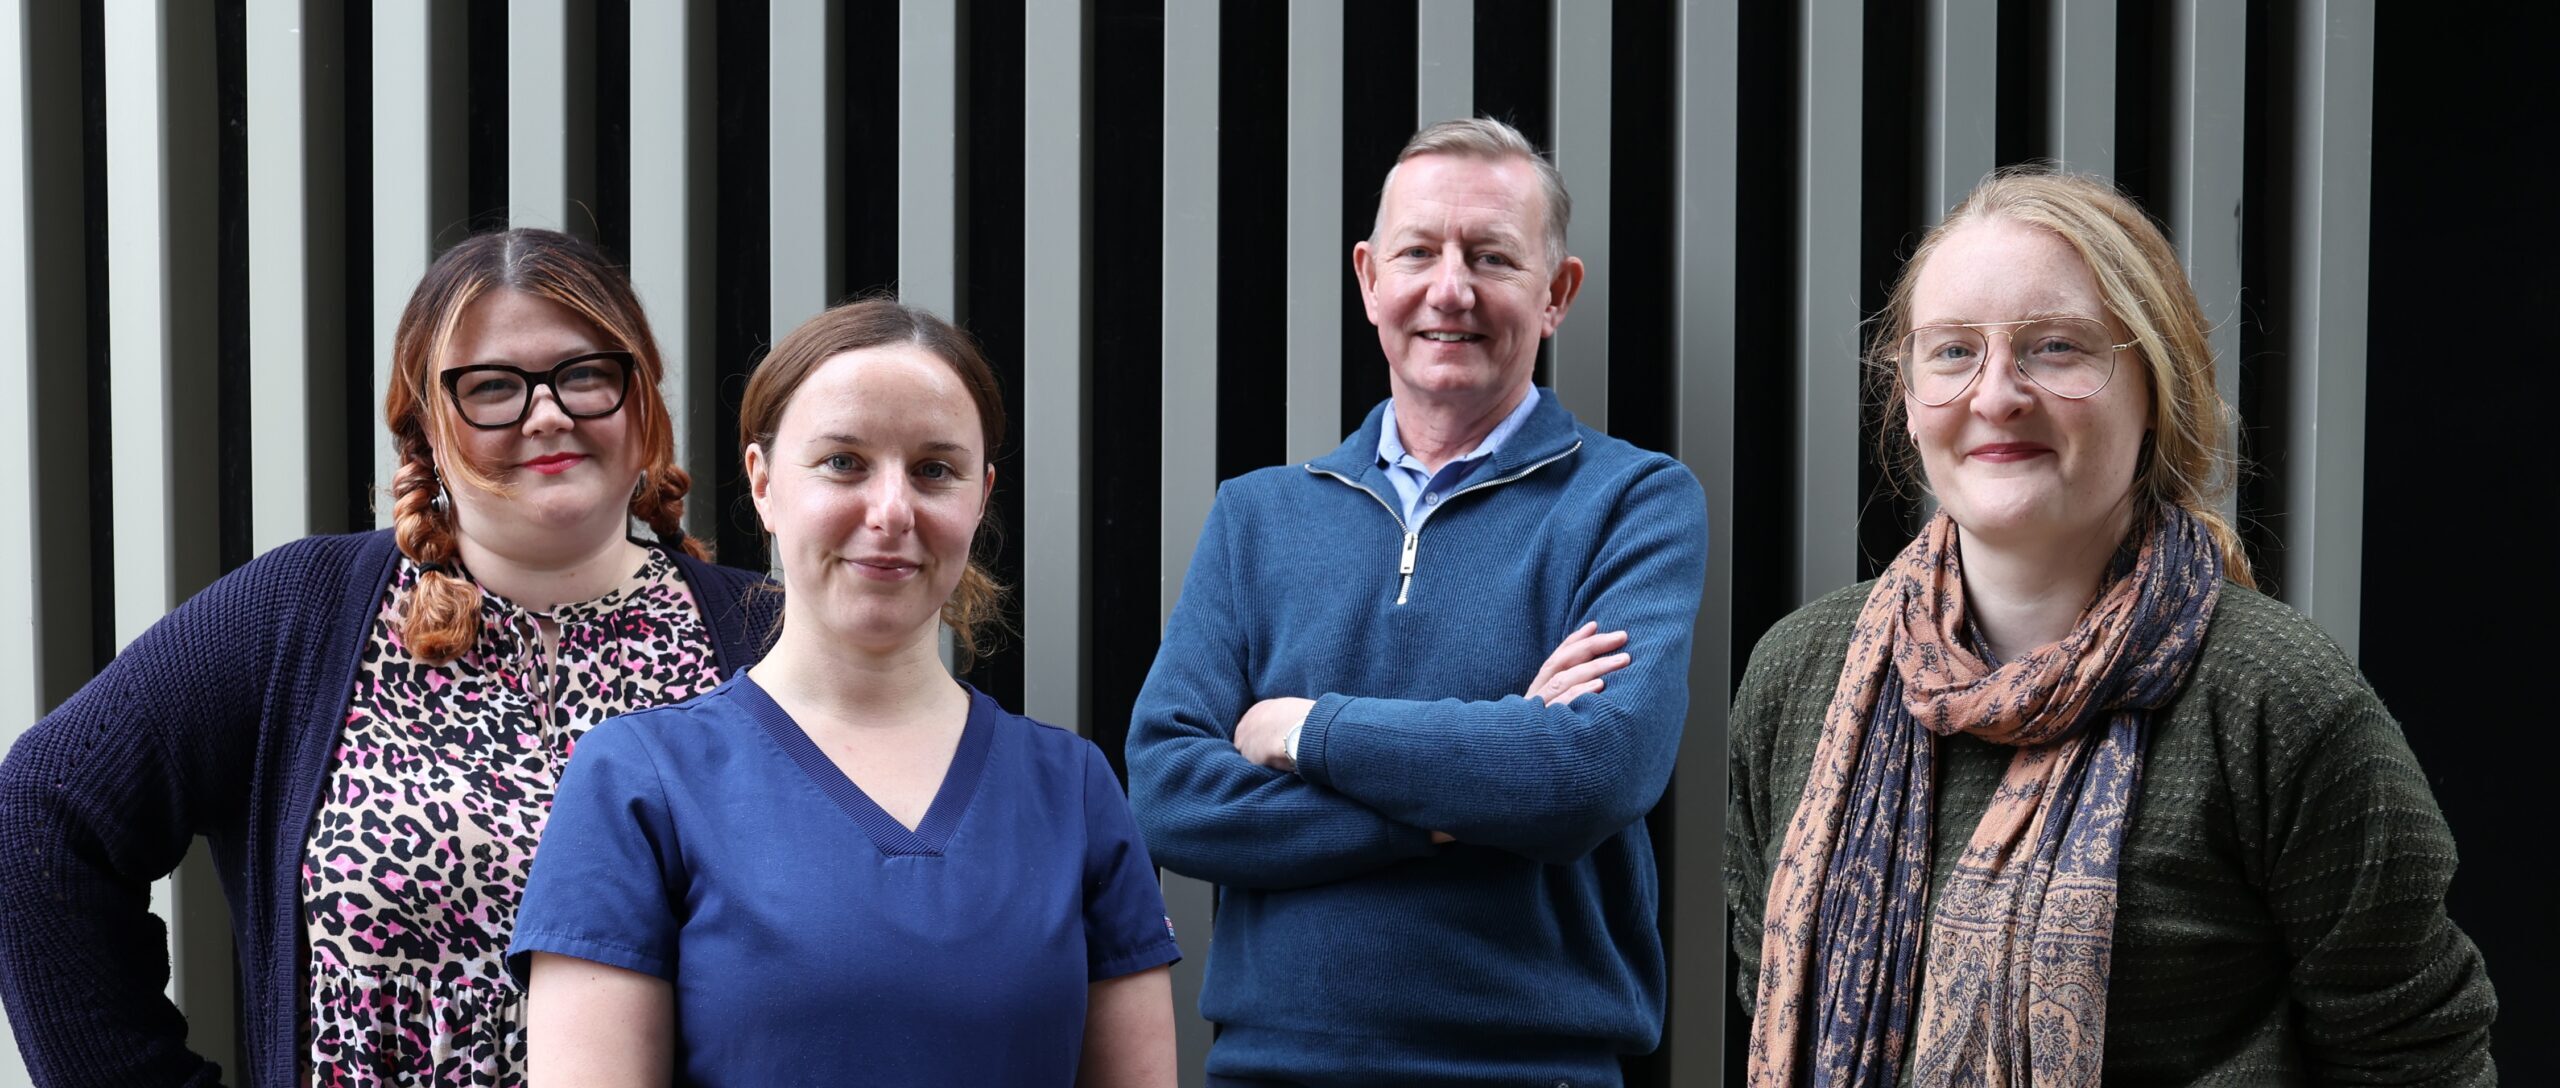 4 members of the hospital inreach team, smiling at the camera in a posed shot.